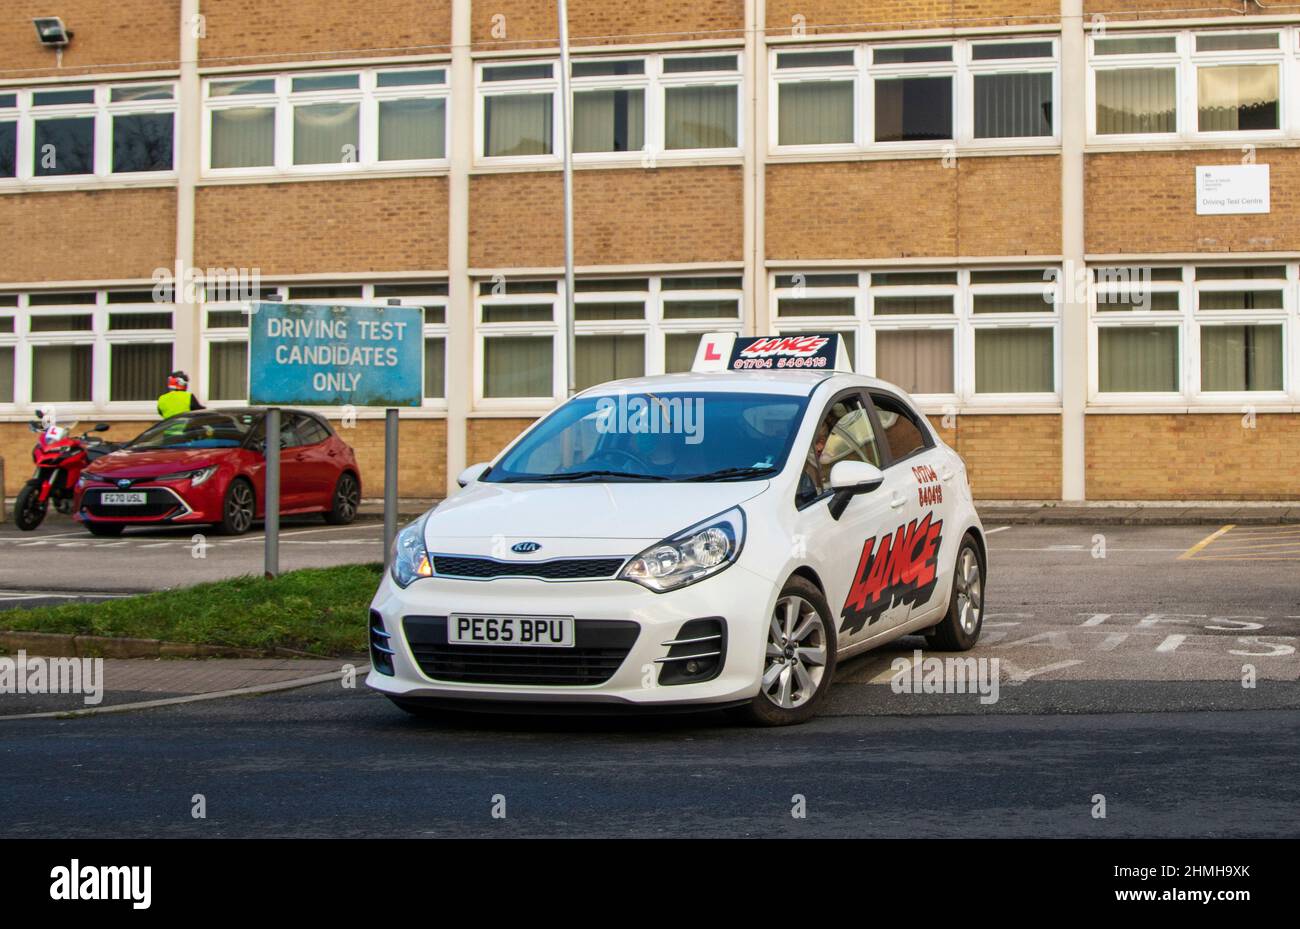 DVSA Driving Test Candidates Only sign, Kia Rio Crdi SR7 ISG 6 speed manual car learner drivers taking their proficiency test in Southport, Merseyside, UK Stock Photo